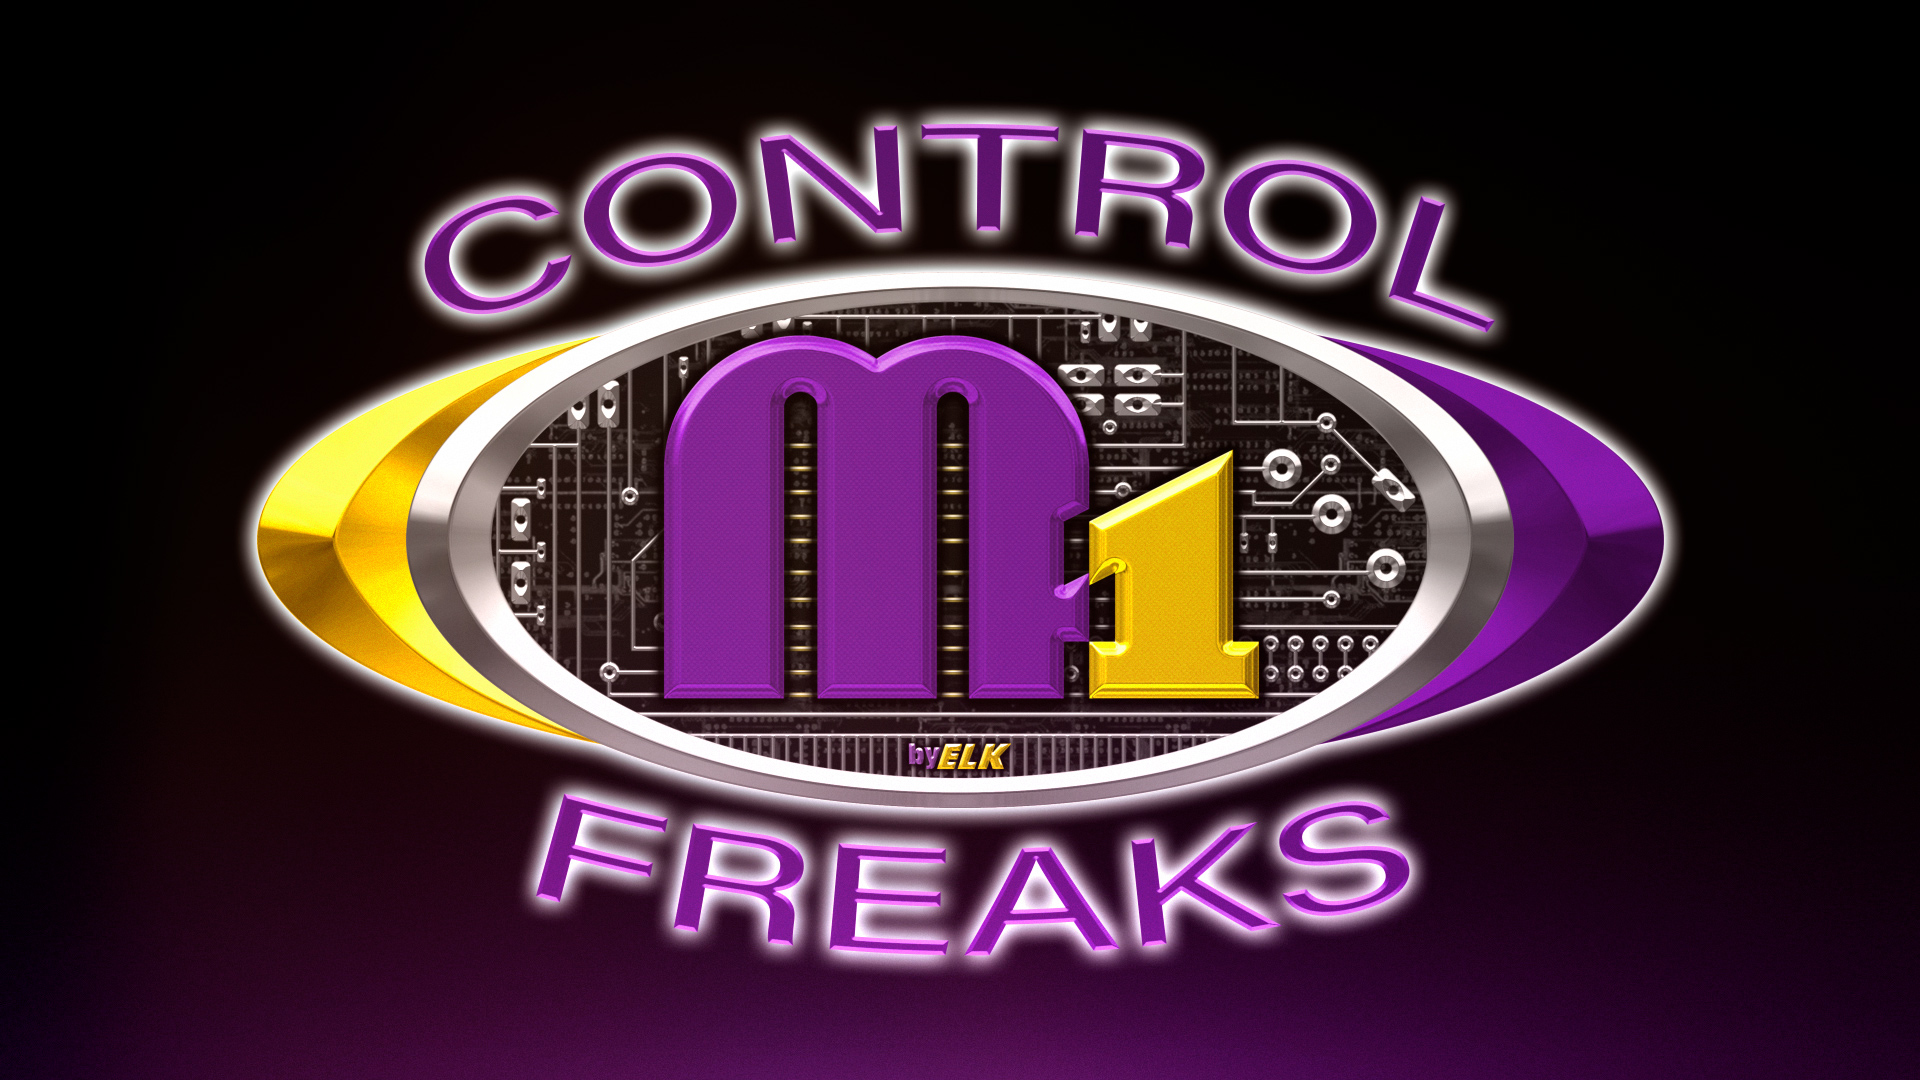 Are you a #controlfreak?